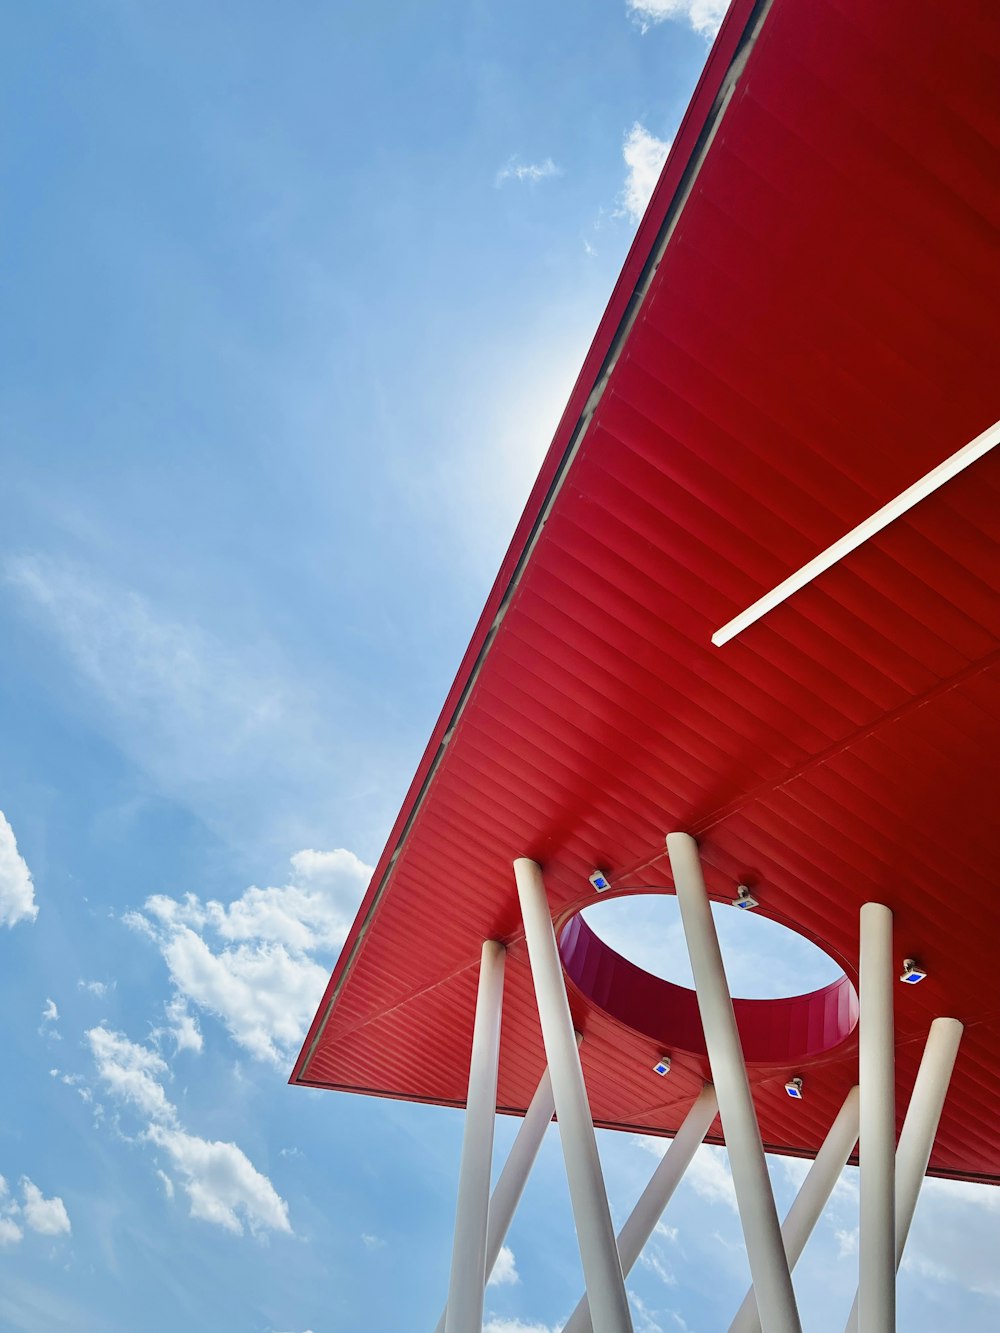 a large red structure with a sky in the background